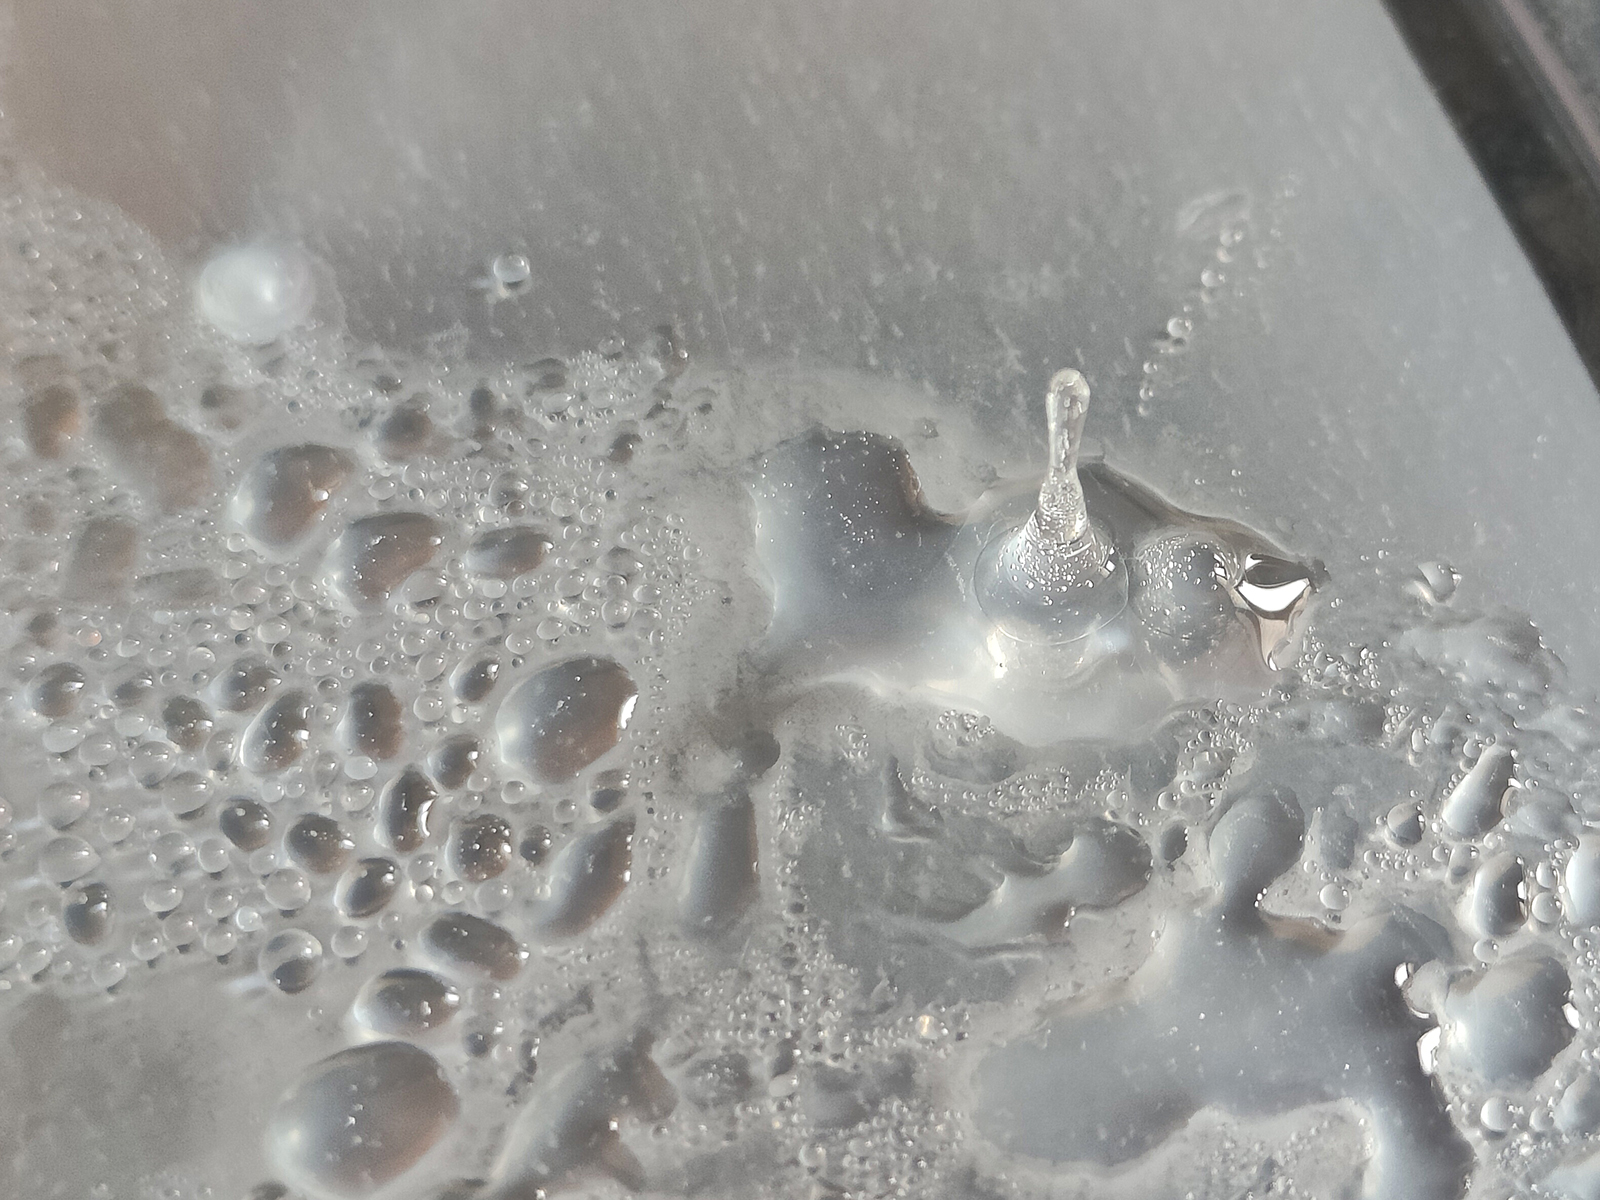 An icicle frozen on a container lid photographed with the Realme GT 2 Pro's primary 50MP camera.